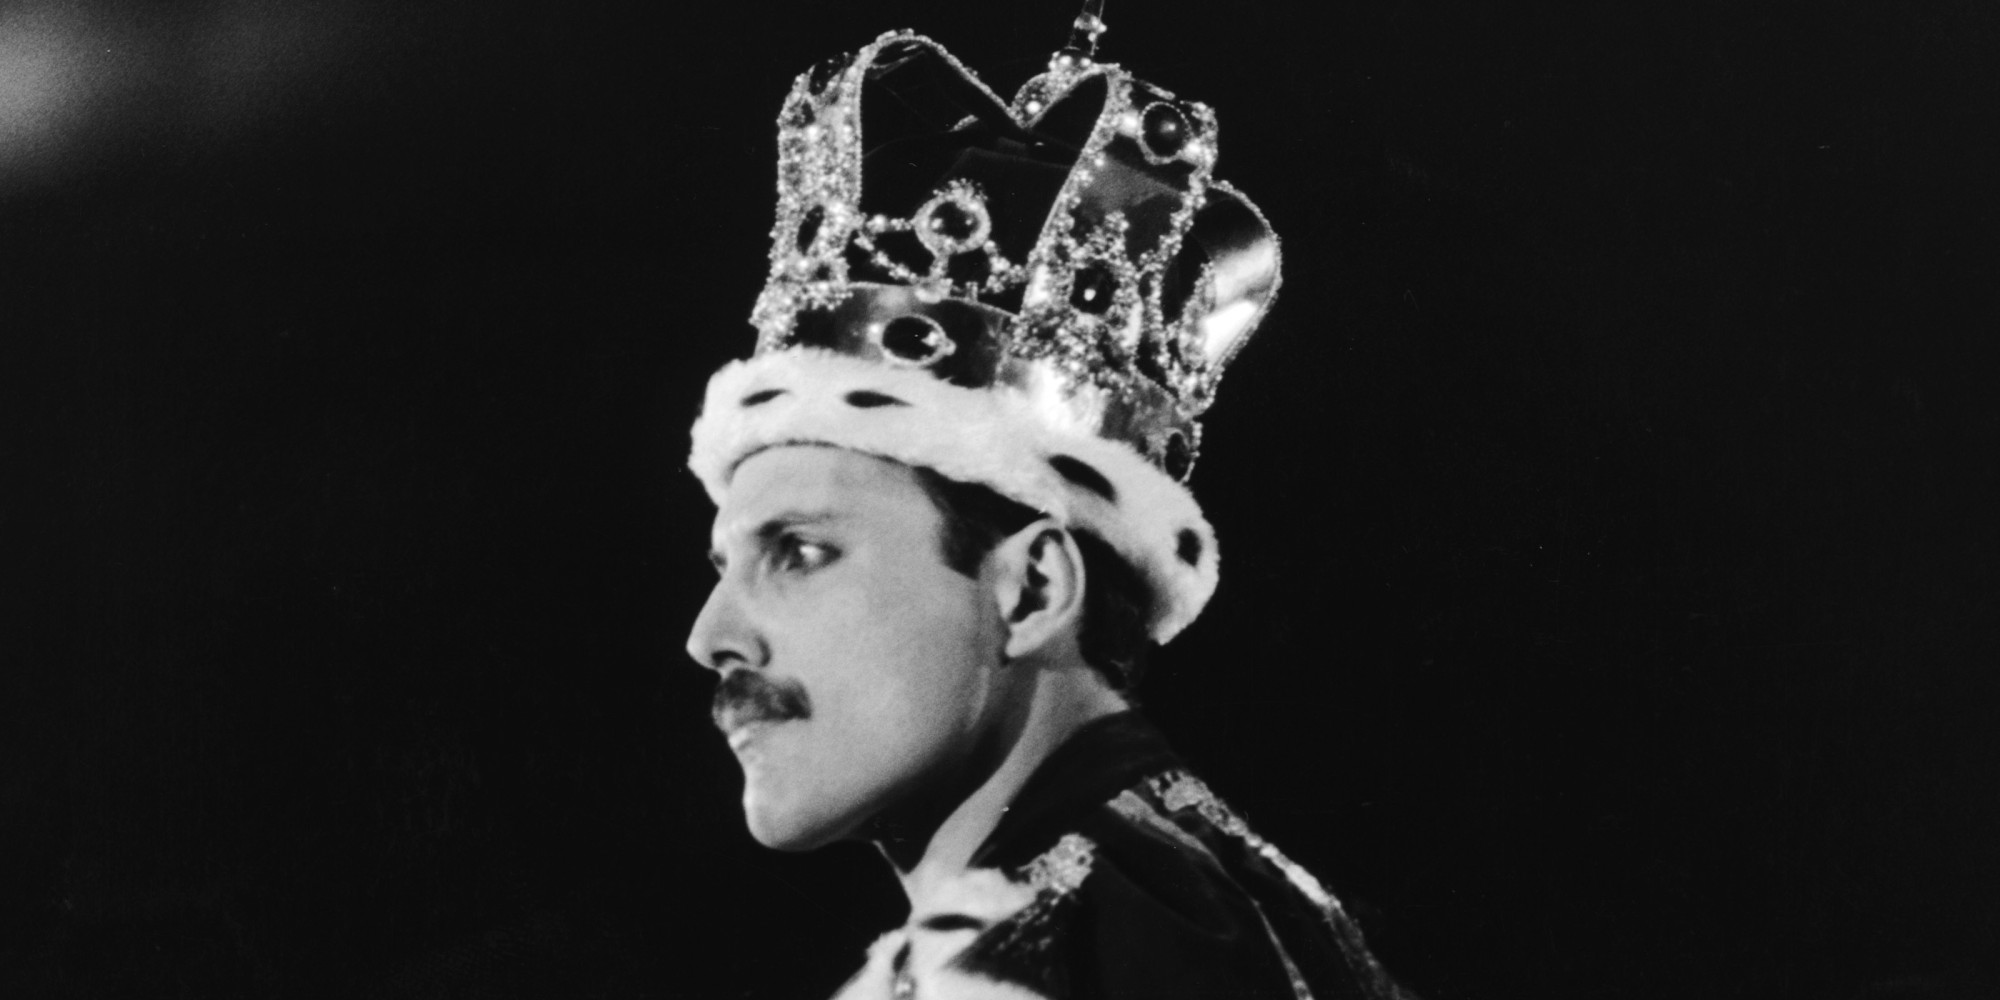 Singer Freddie Mercury dressed as a King during a performance with his group Queen at Wembley Stadium in London, 15th July 1986. (Photo by Dave Hogan/Getty Images)